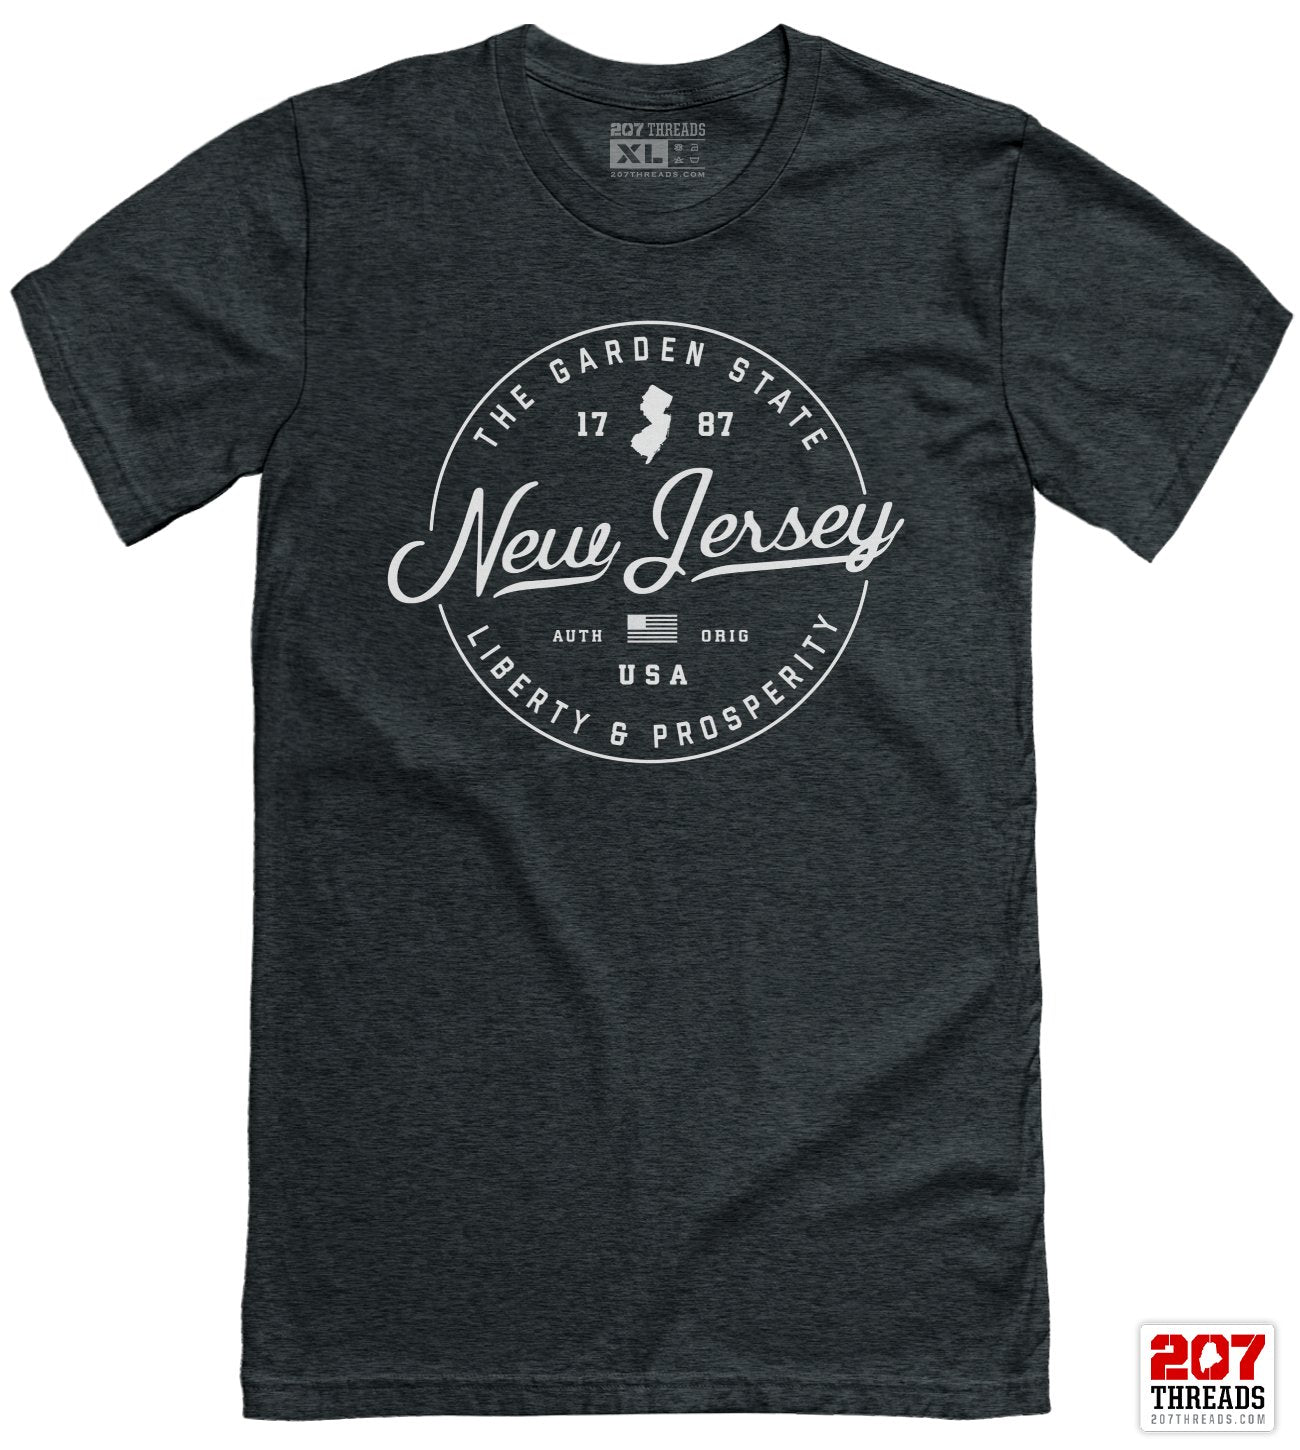 State of New Jersey T-Shirt - Soft New Jersey Vacation Tee